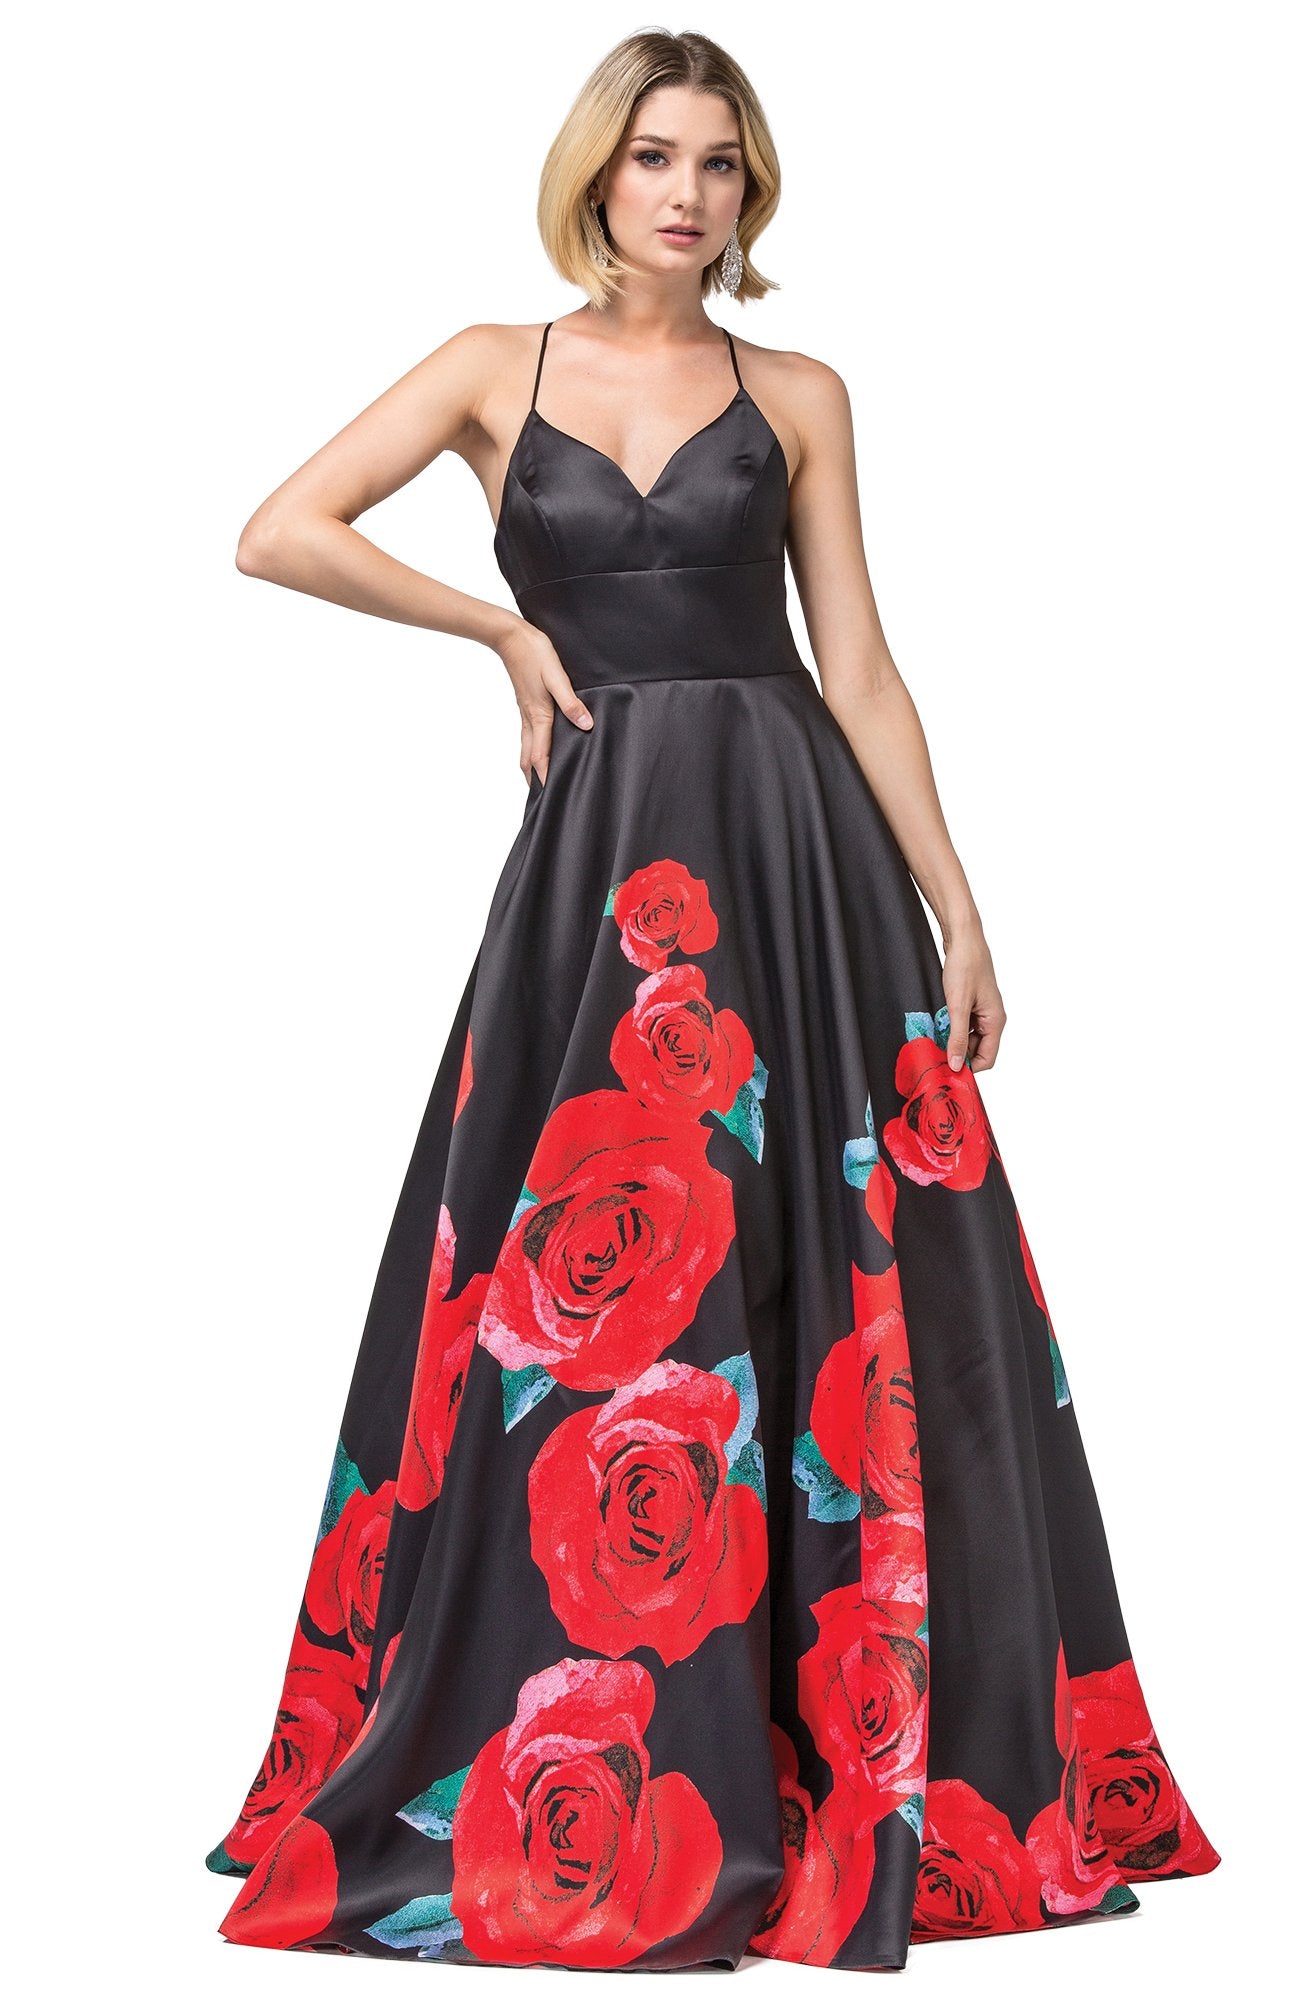 Dancing Queen - 2843 Floral V-Neck Pleated Ballgown In Black and Red